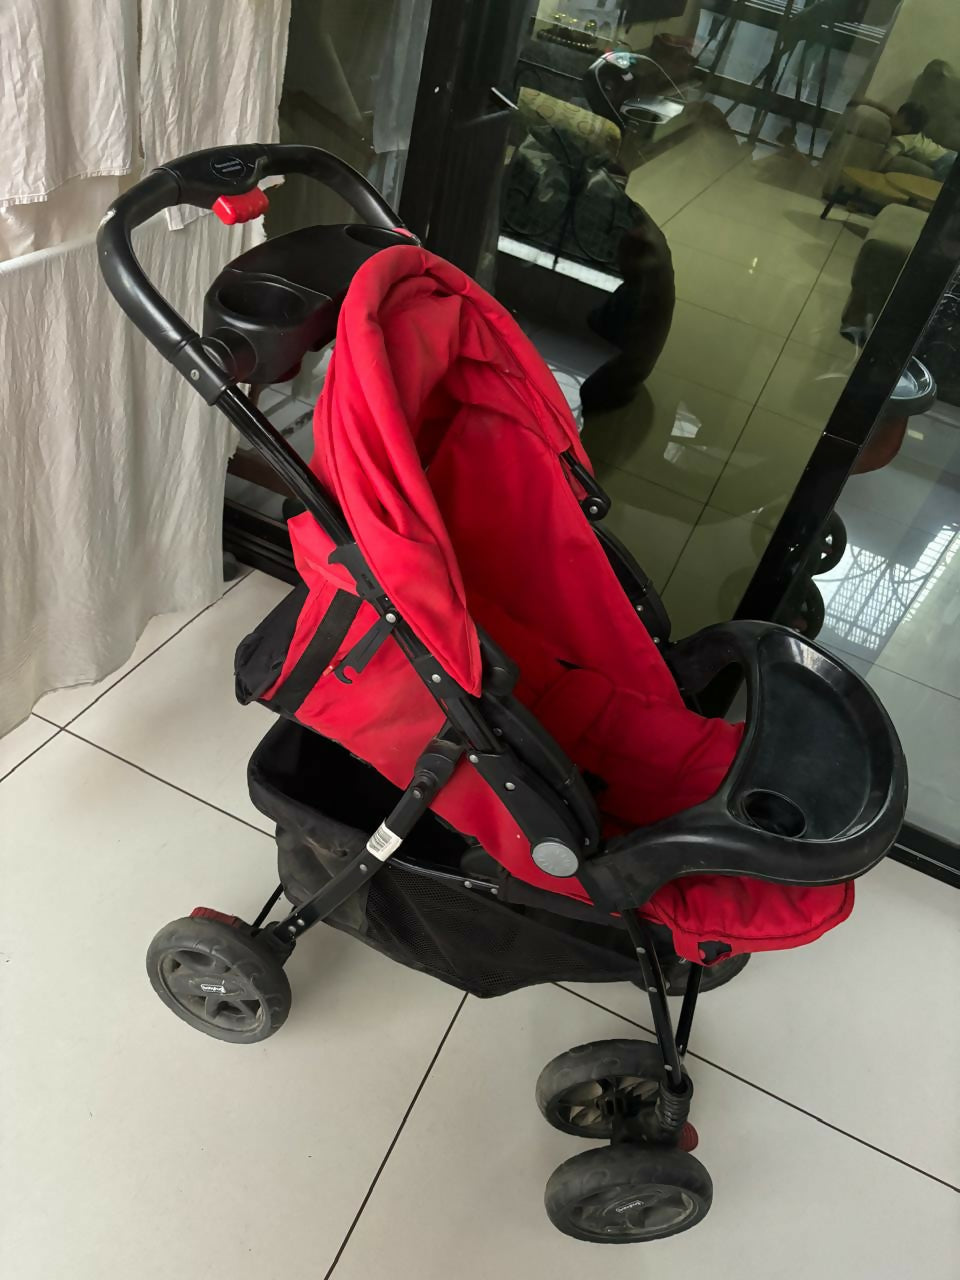 Discover the versatile BABYHUG Stroller/Pram for Baby, featuring a reversible handle, five-point safety harness, and large adjustable canopy for ultimate comfort and protection.